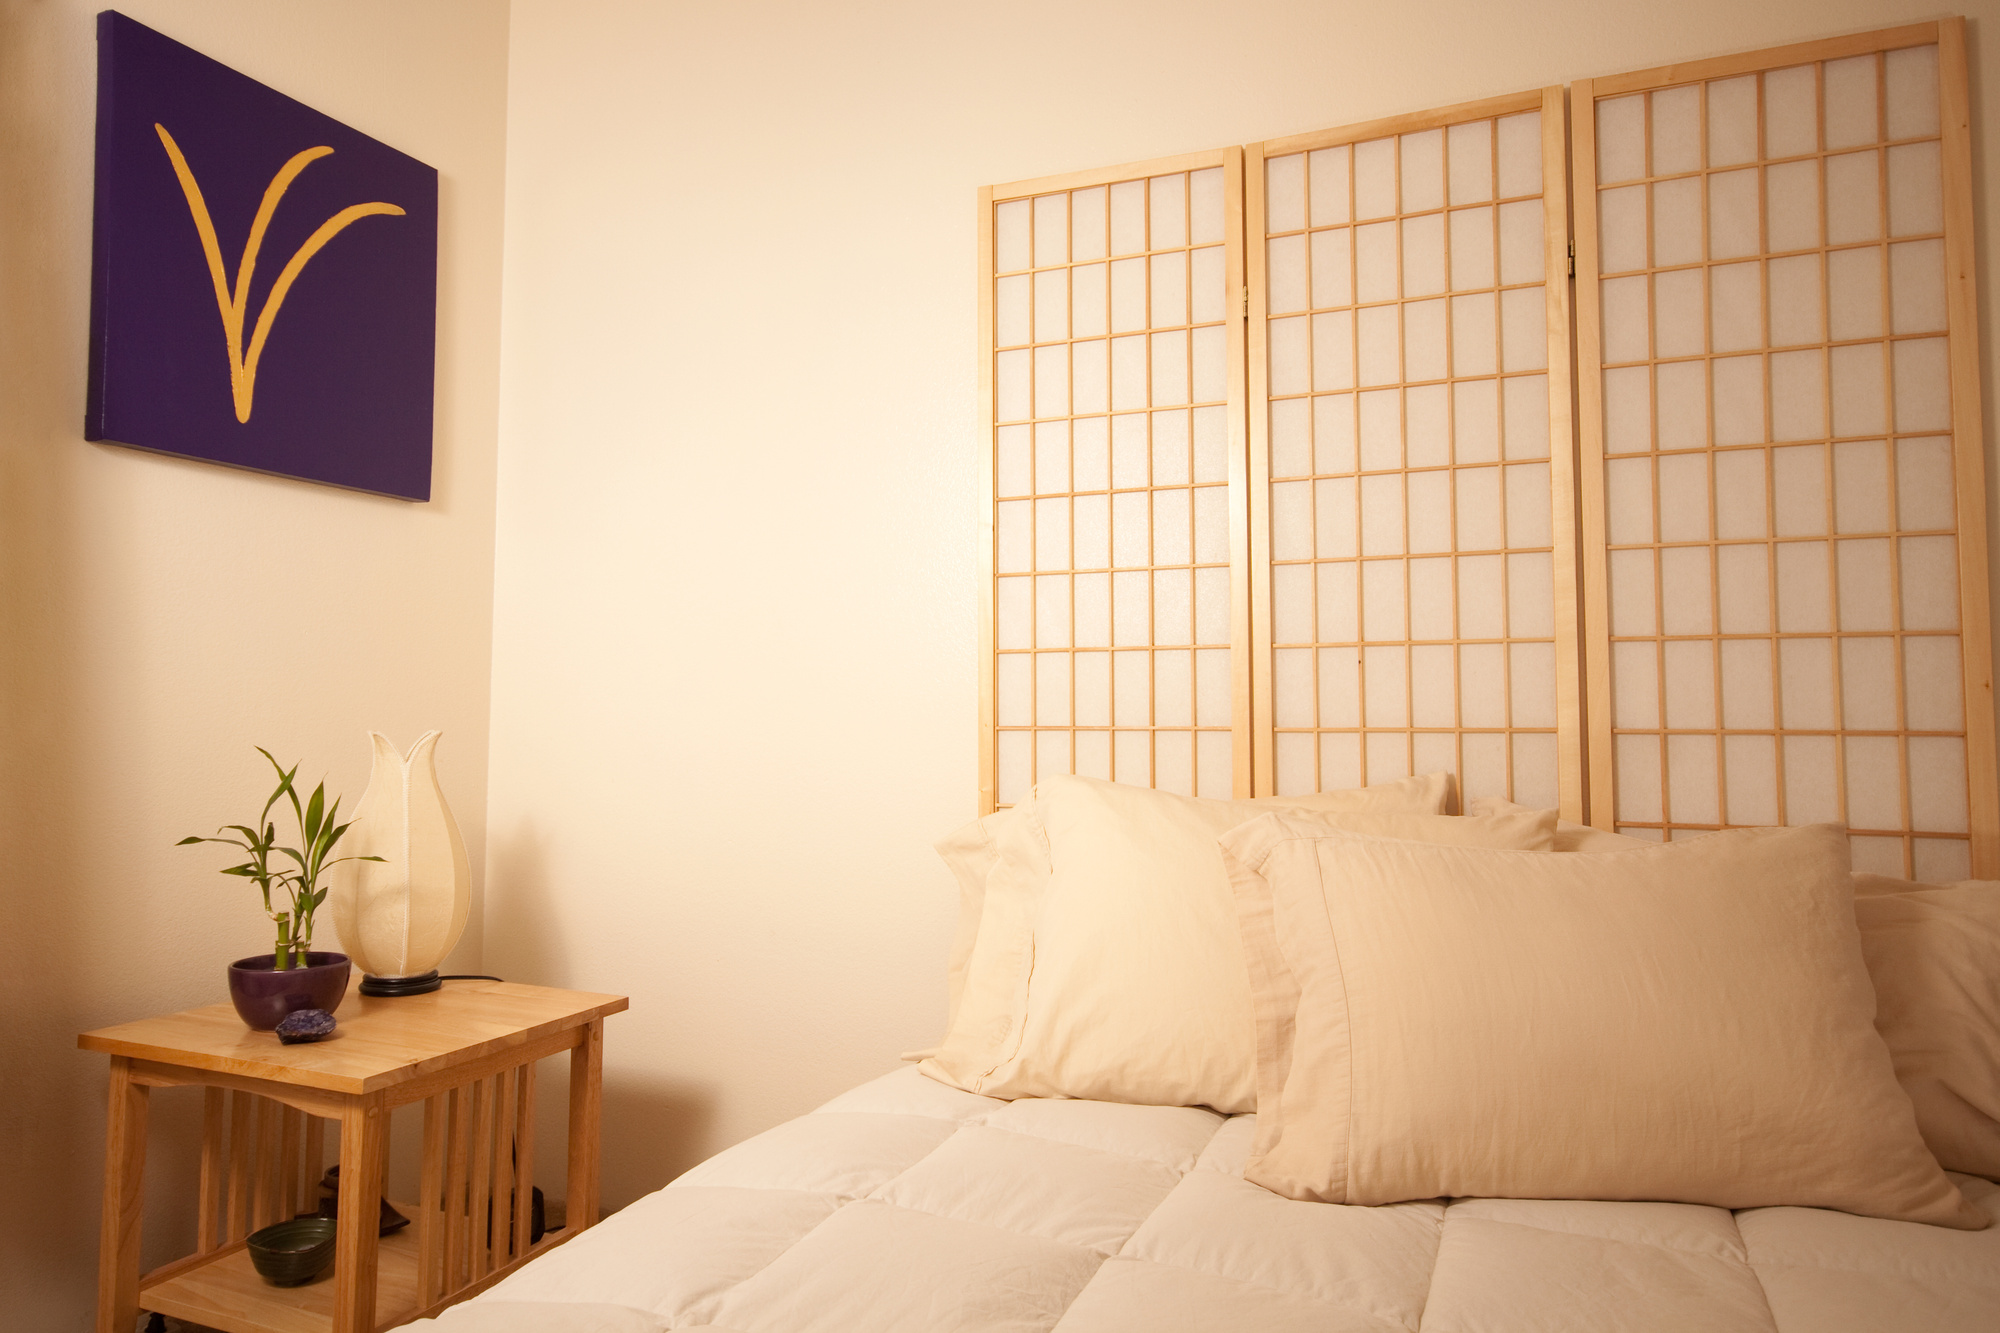 Feng shui is a design principle that helps living spaces feel harmonious. Here's how to use these principles to design a relaxing and zen feng shui bedroom.